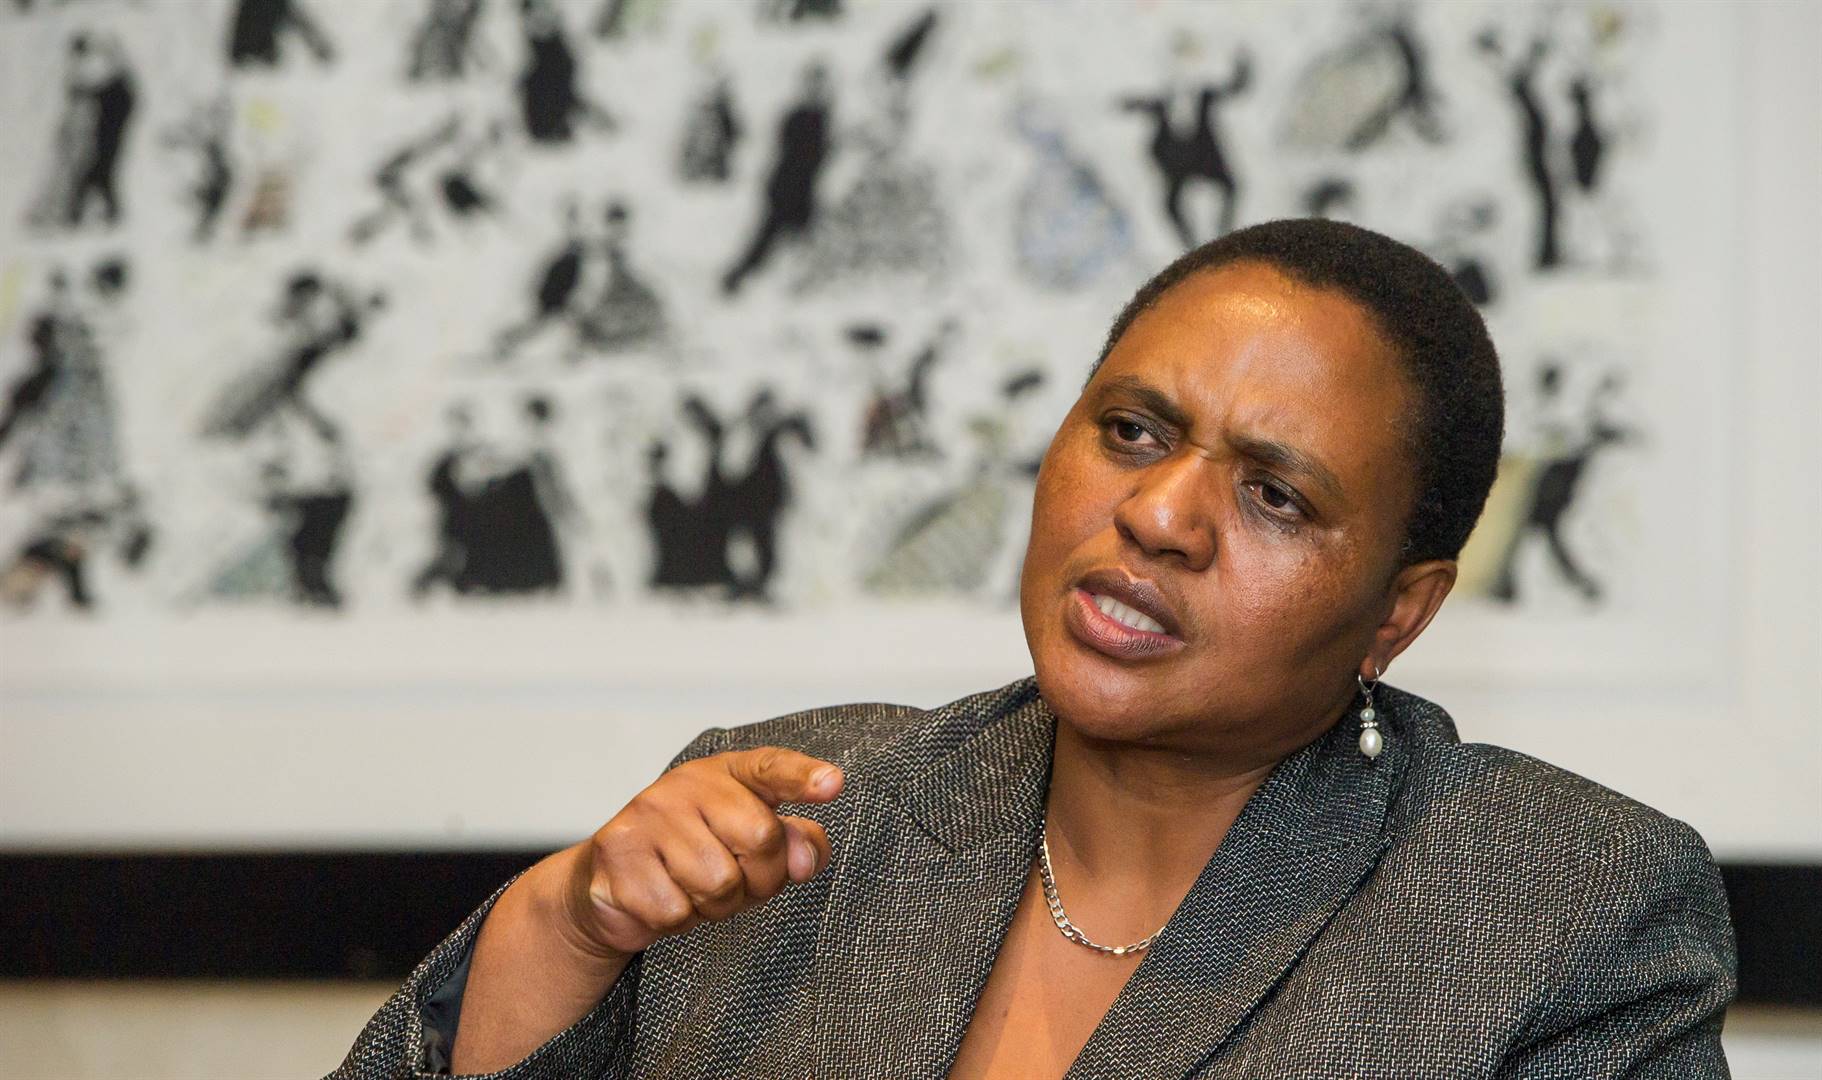 Agriculture, Land Reform and Rural Development Minister Thoko Didiza. Photo: Deon Raath